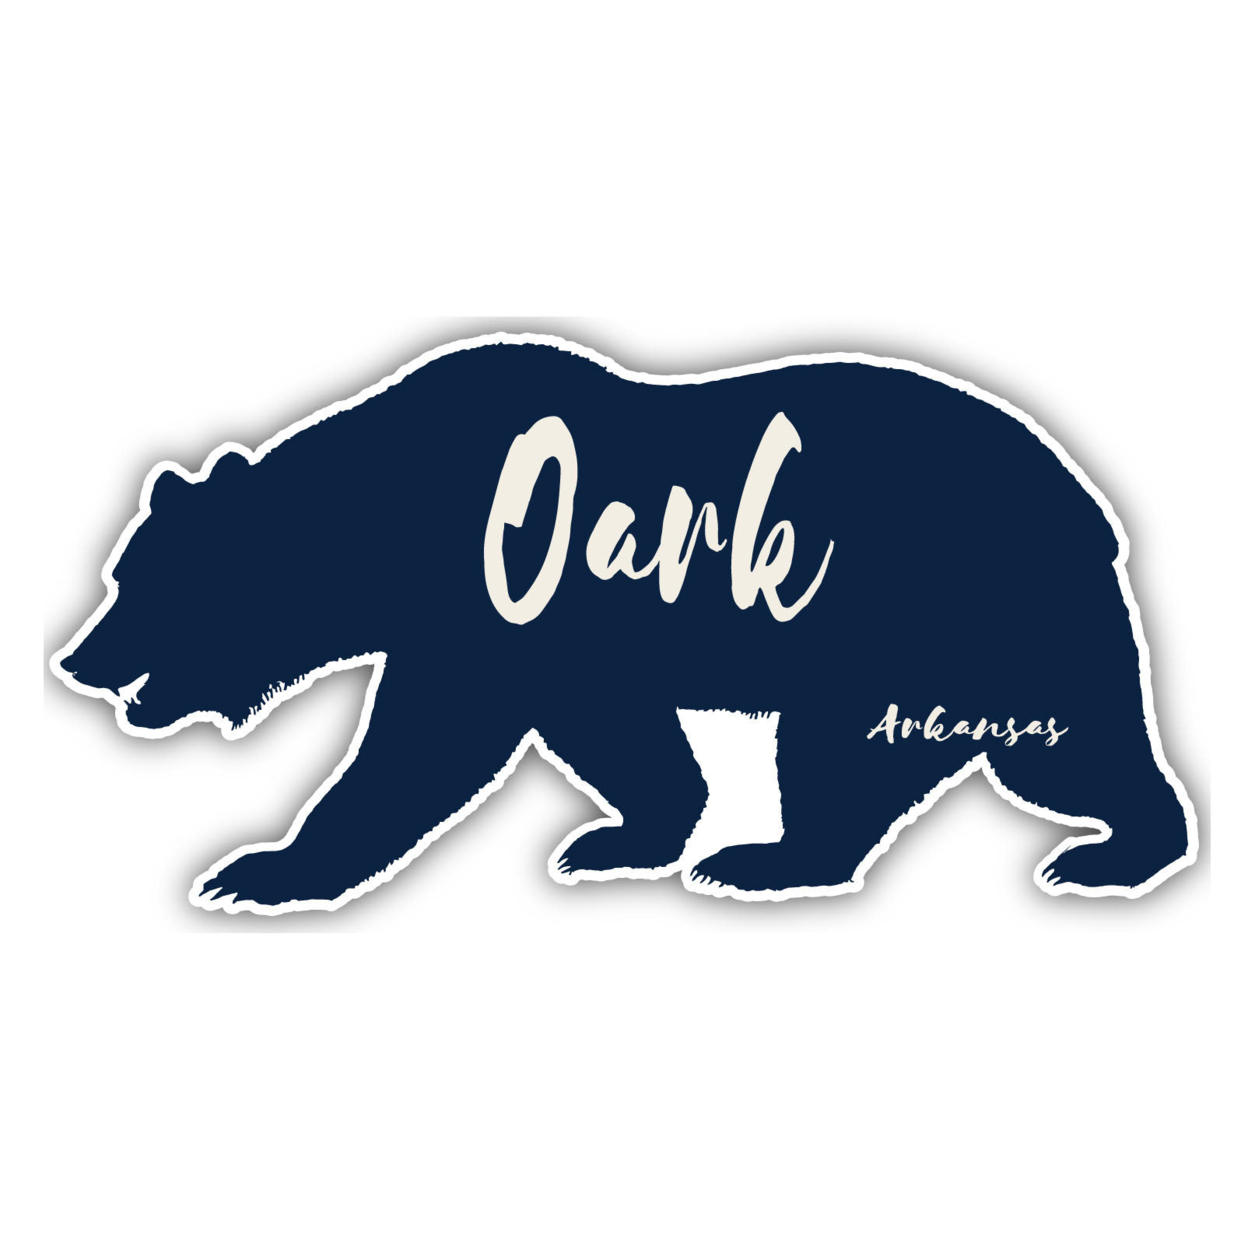 Obannon Woods Indiana Souvenir Decorative Stickers (Choose Theme And Size) - Single Unit, 4-Inch, Great Outdoors